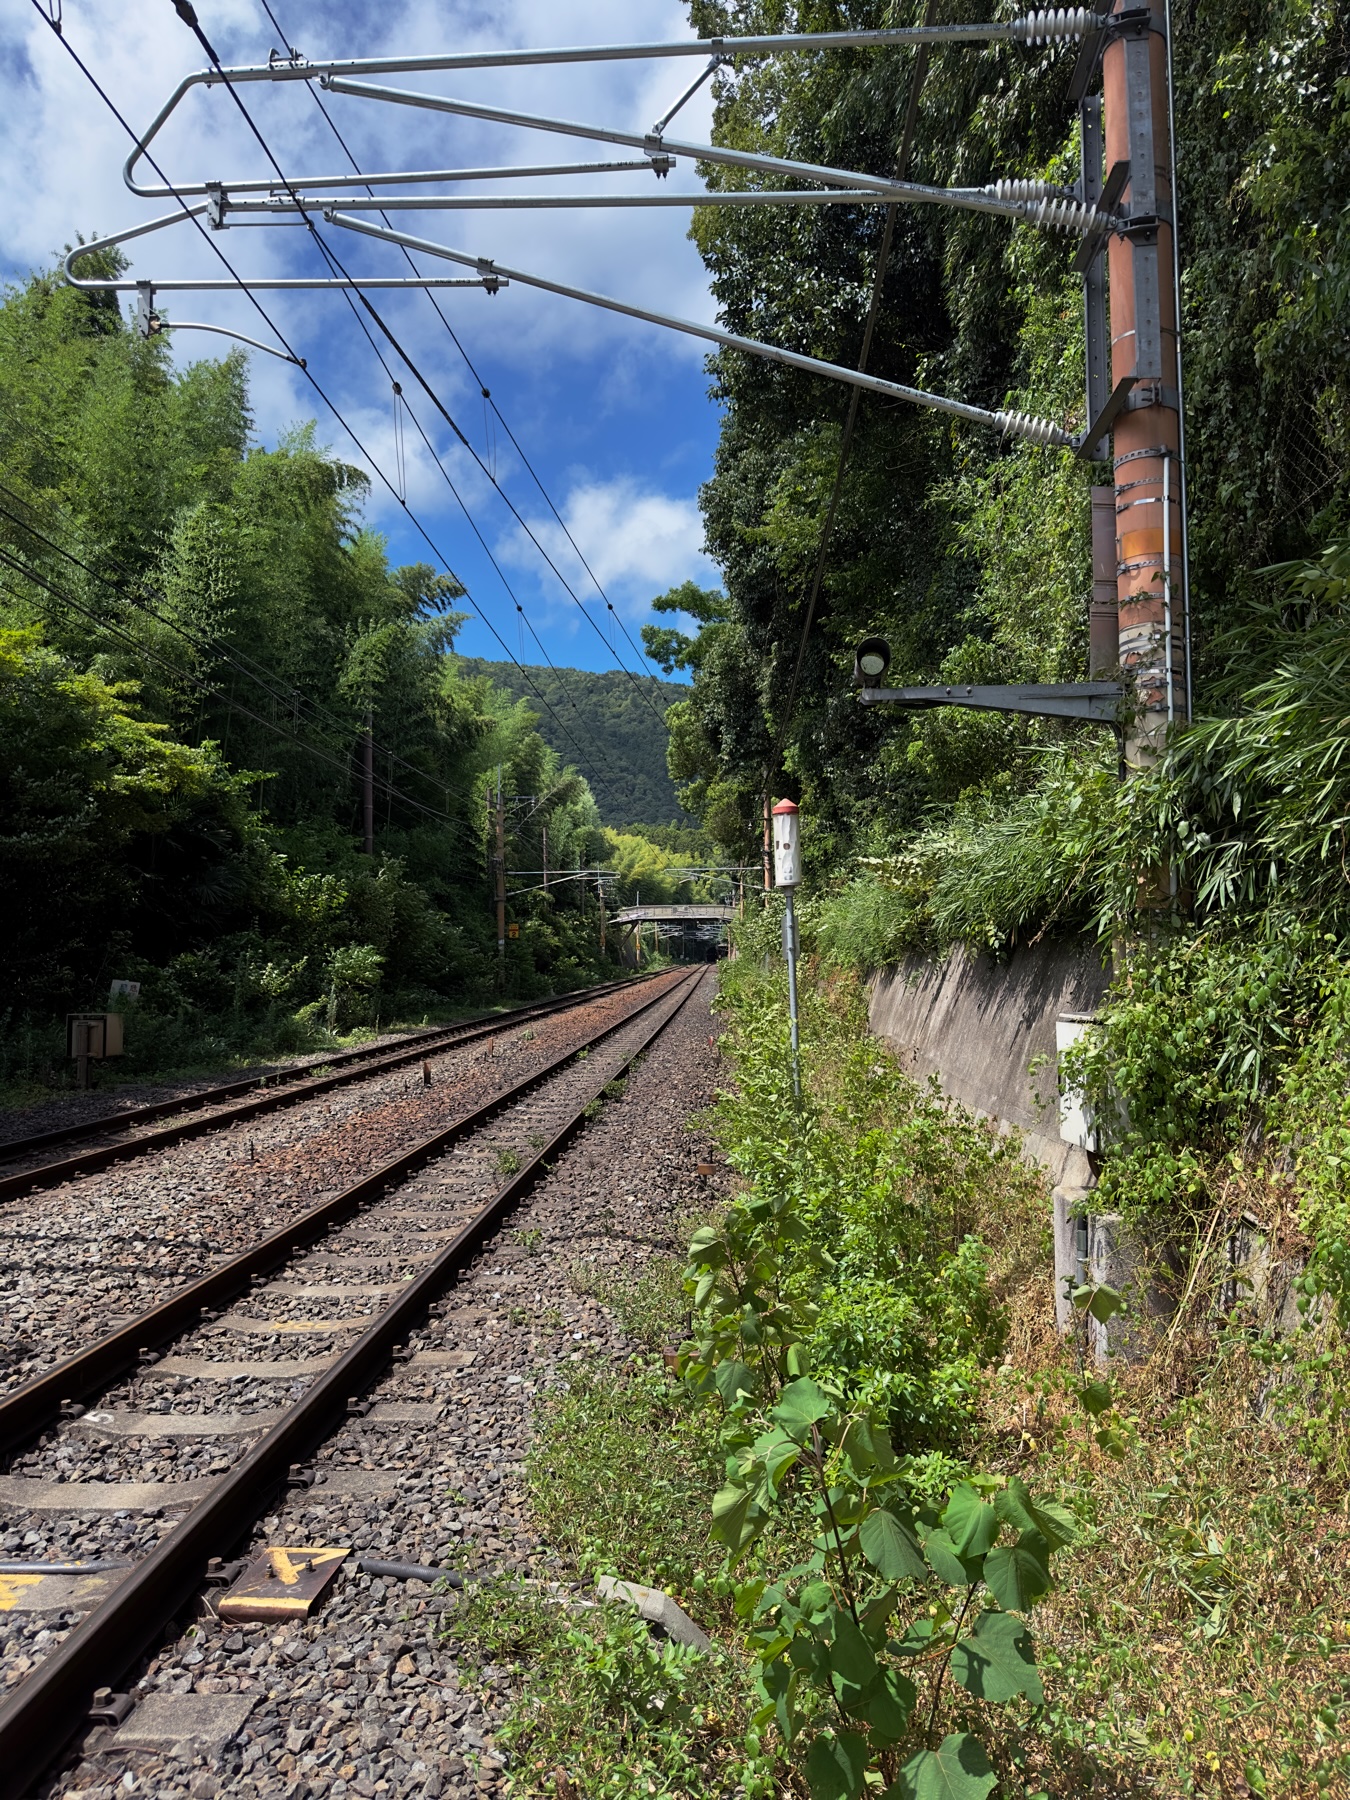 A view on the side of the train tracks showing a bridge in the distance